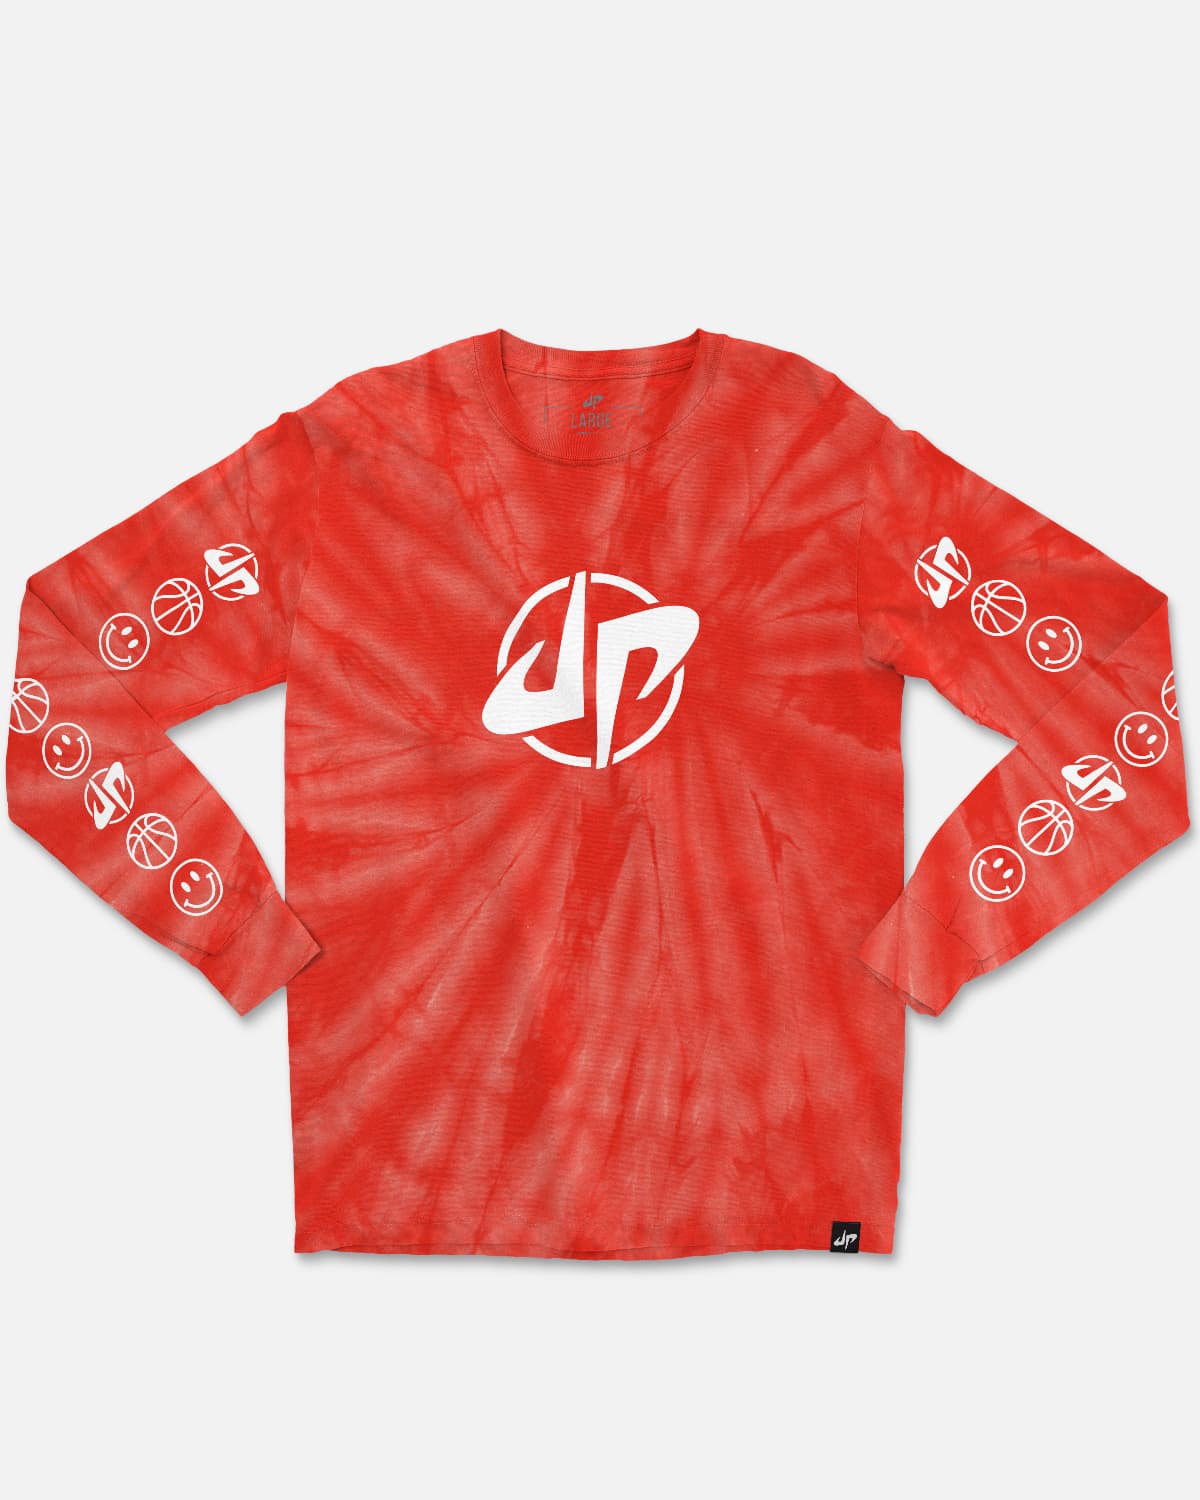 Dude Perfect 'Triple Double' Performance Long Sleeve Tee (Red)